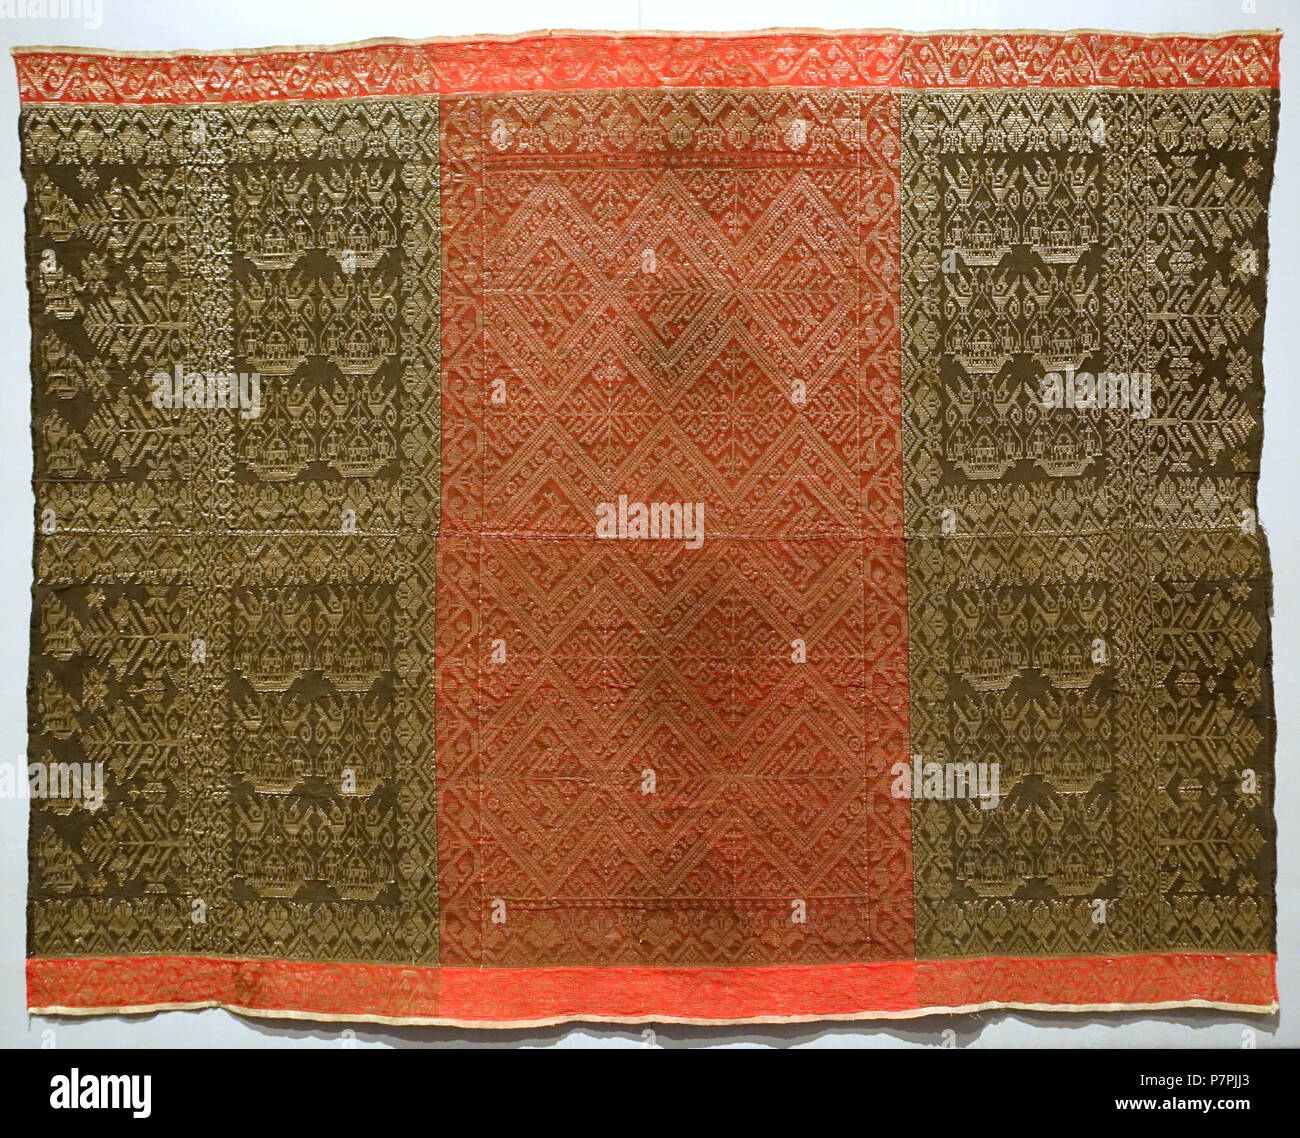 English: Exhibit in the Textile Museum, George Washington University, Washington, DC, USA. Photography was permitted in the museum without restriction. This work is old enough so that it is in the . 26 March 2015, 15:55:19 235 Kre alang (skirt), Indonesia, Sumbawa, Semawa people, early 20th century, cotton, metal-wrapped silk - Textile Museum, George Washington University - DSC09773 Stock Photo